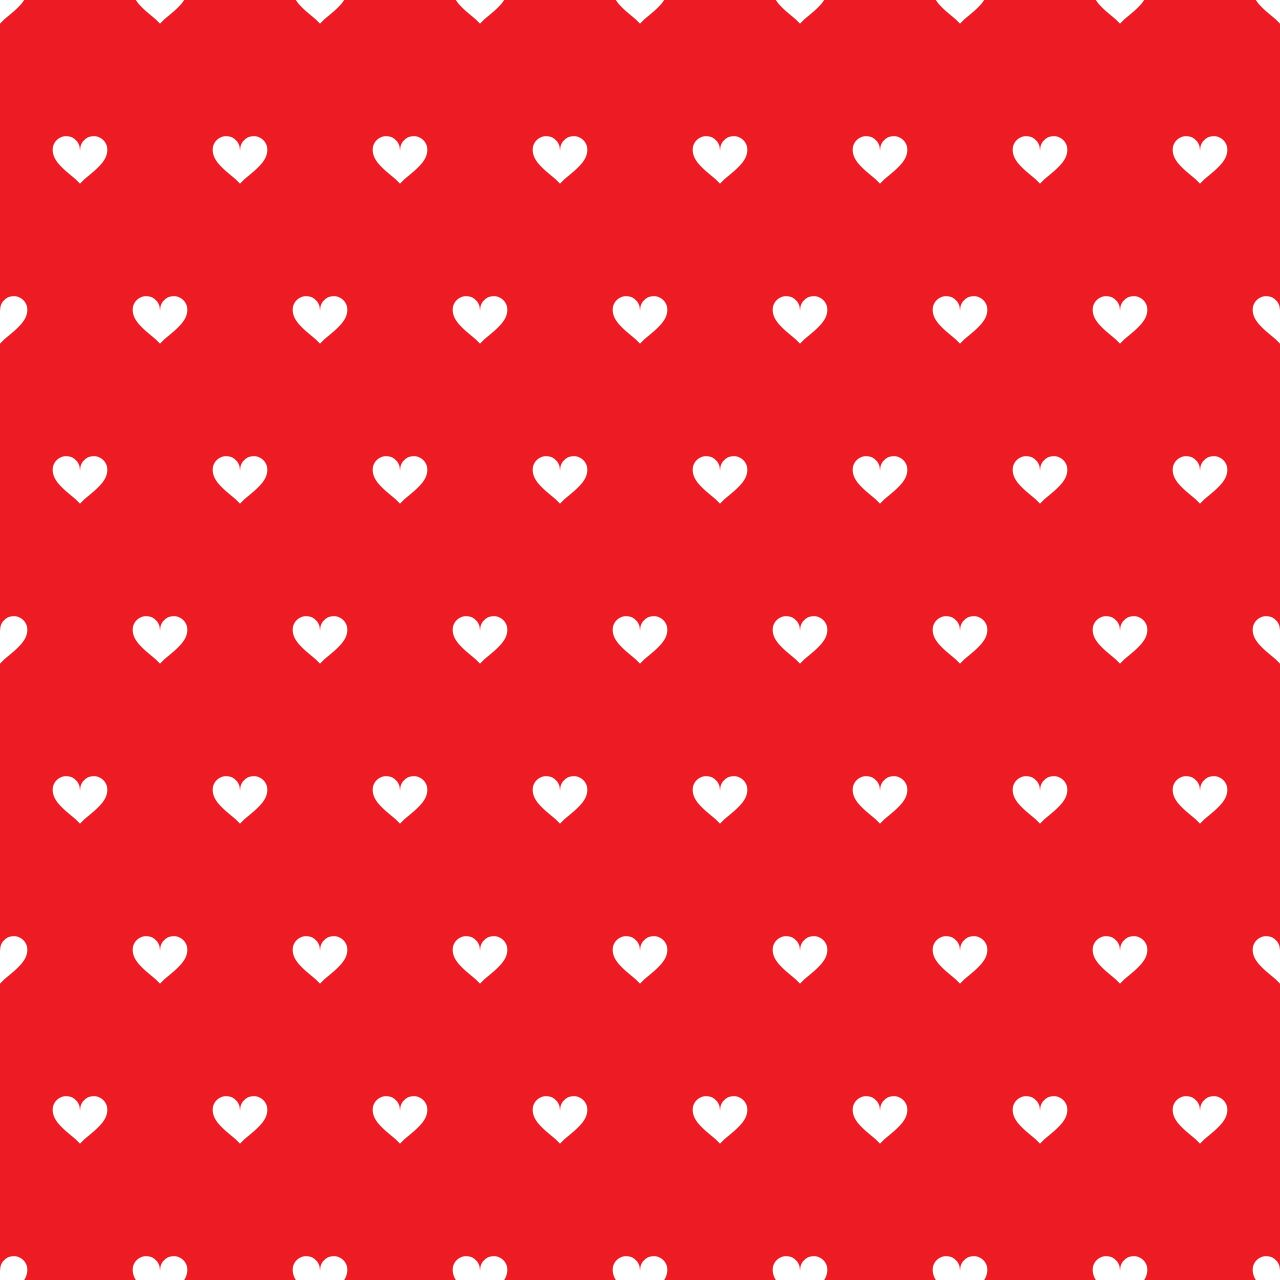 Red & White Hearts Vector Pattern (SVG)